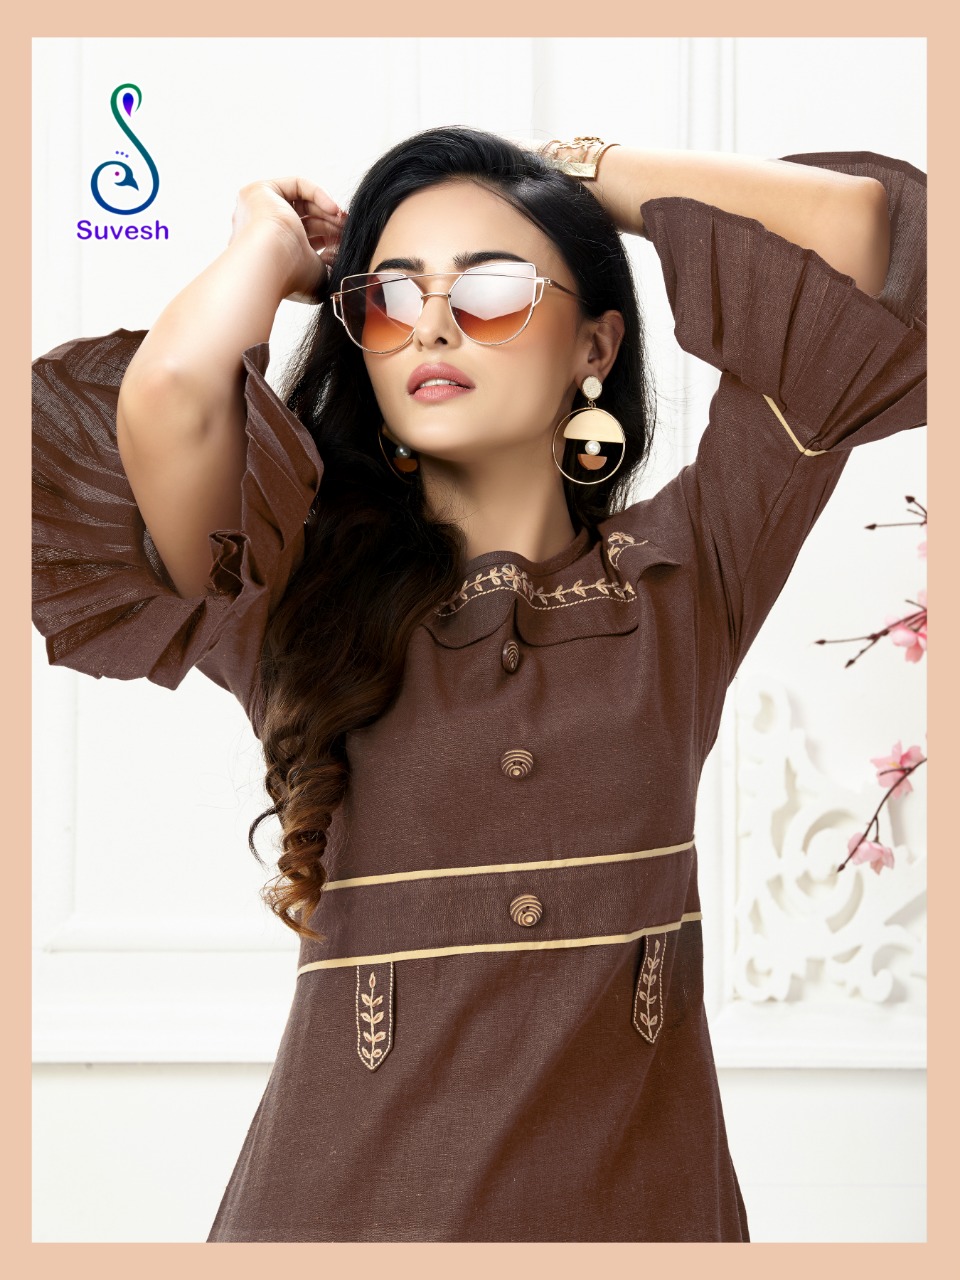 Suvesh rose vol 2 attractive A-line kurties collection online